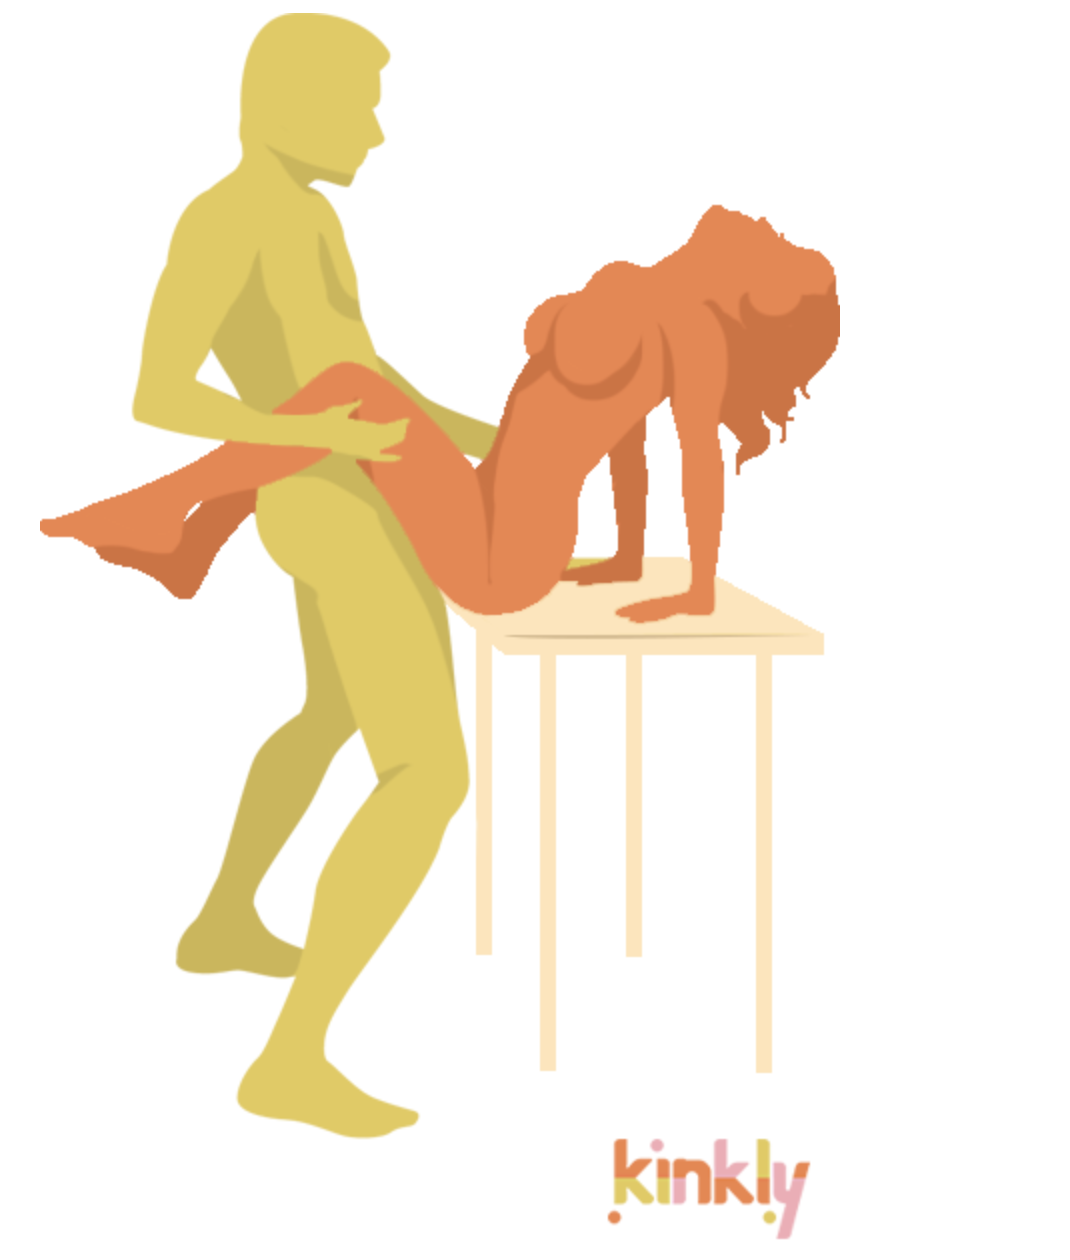 Tabletop Sex Position: The receiving partner should sit on a tabletop. Their butt should be close to the edge of the table with their legs slightly apart to allow penetration. Their penetrating partner stands facing them.